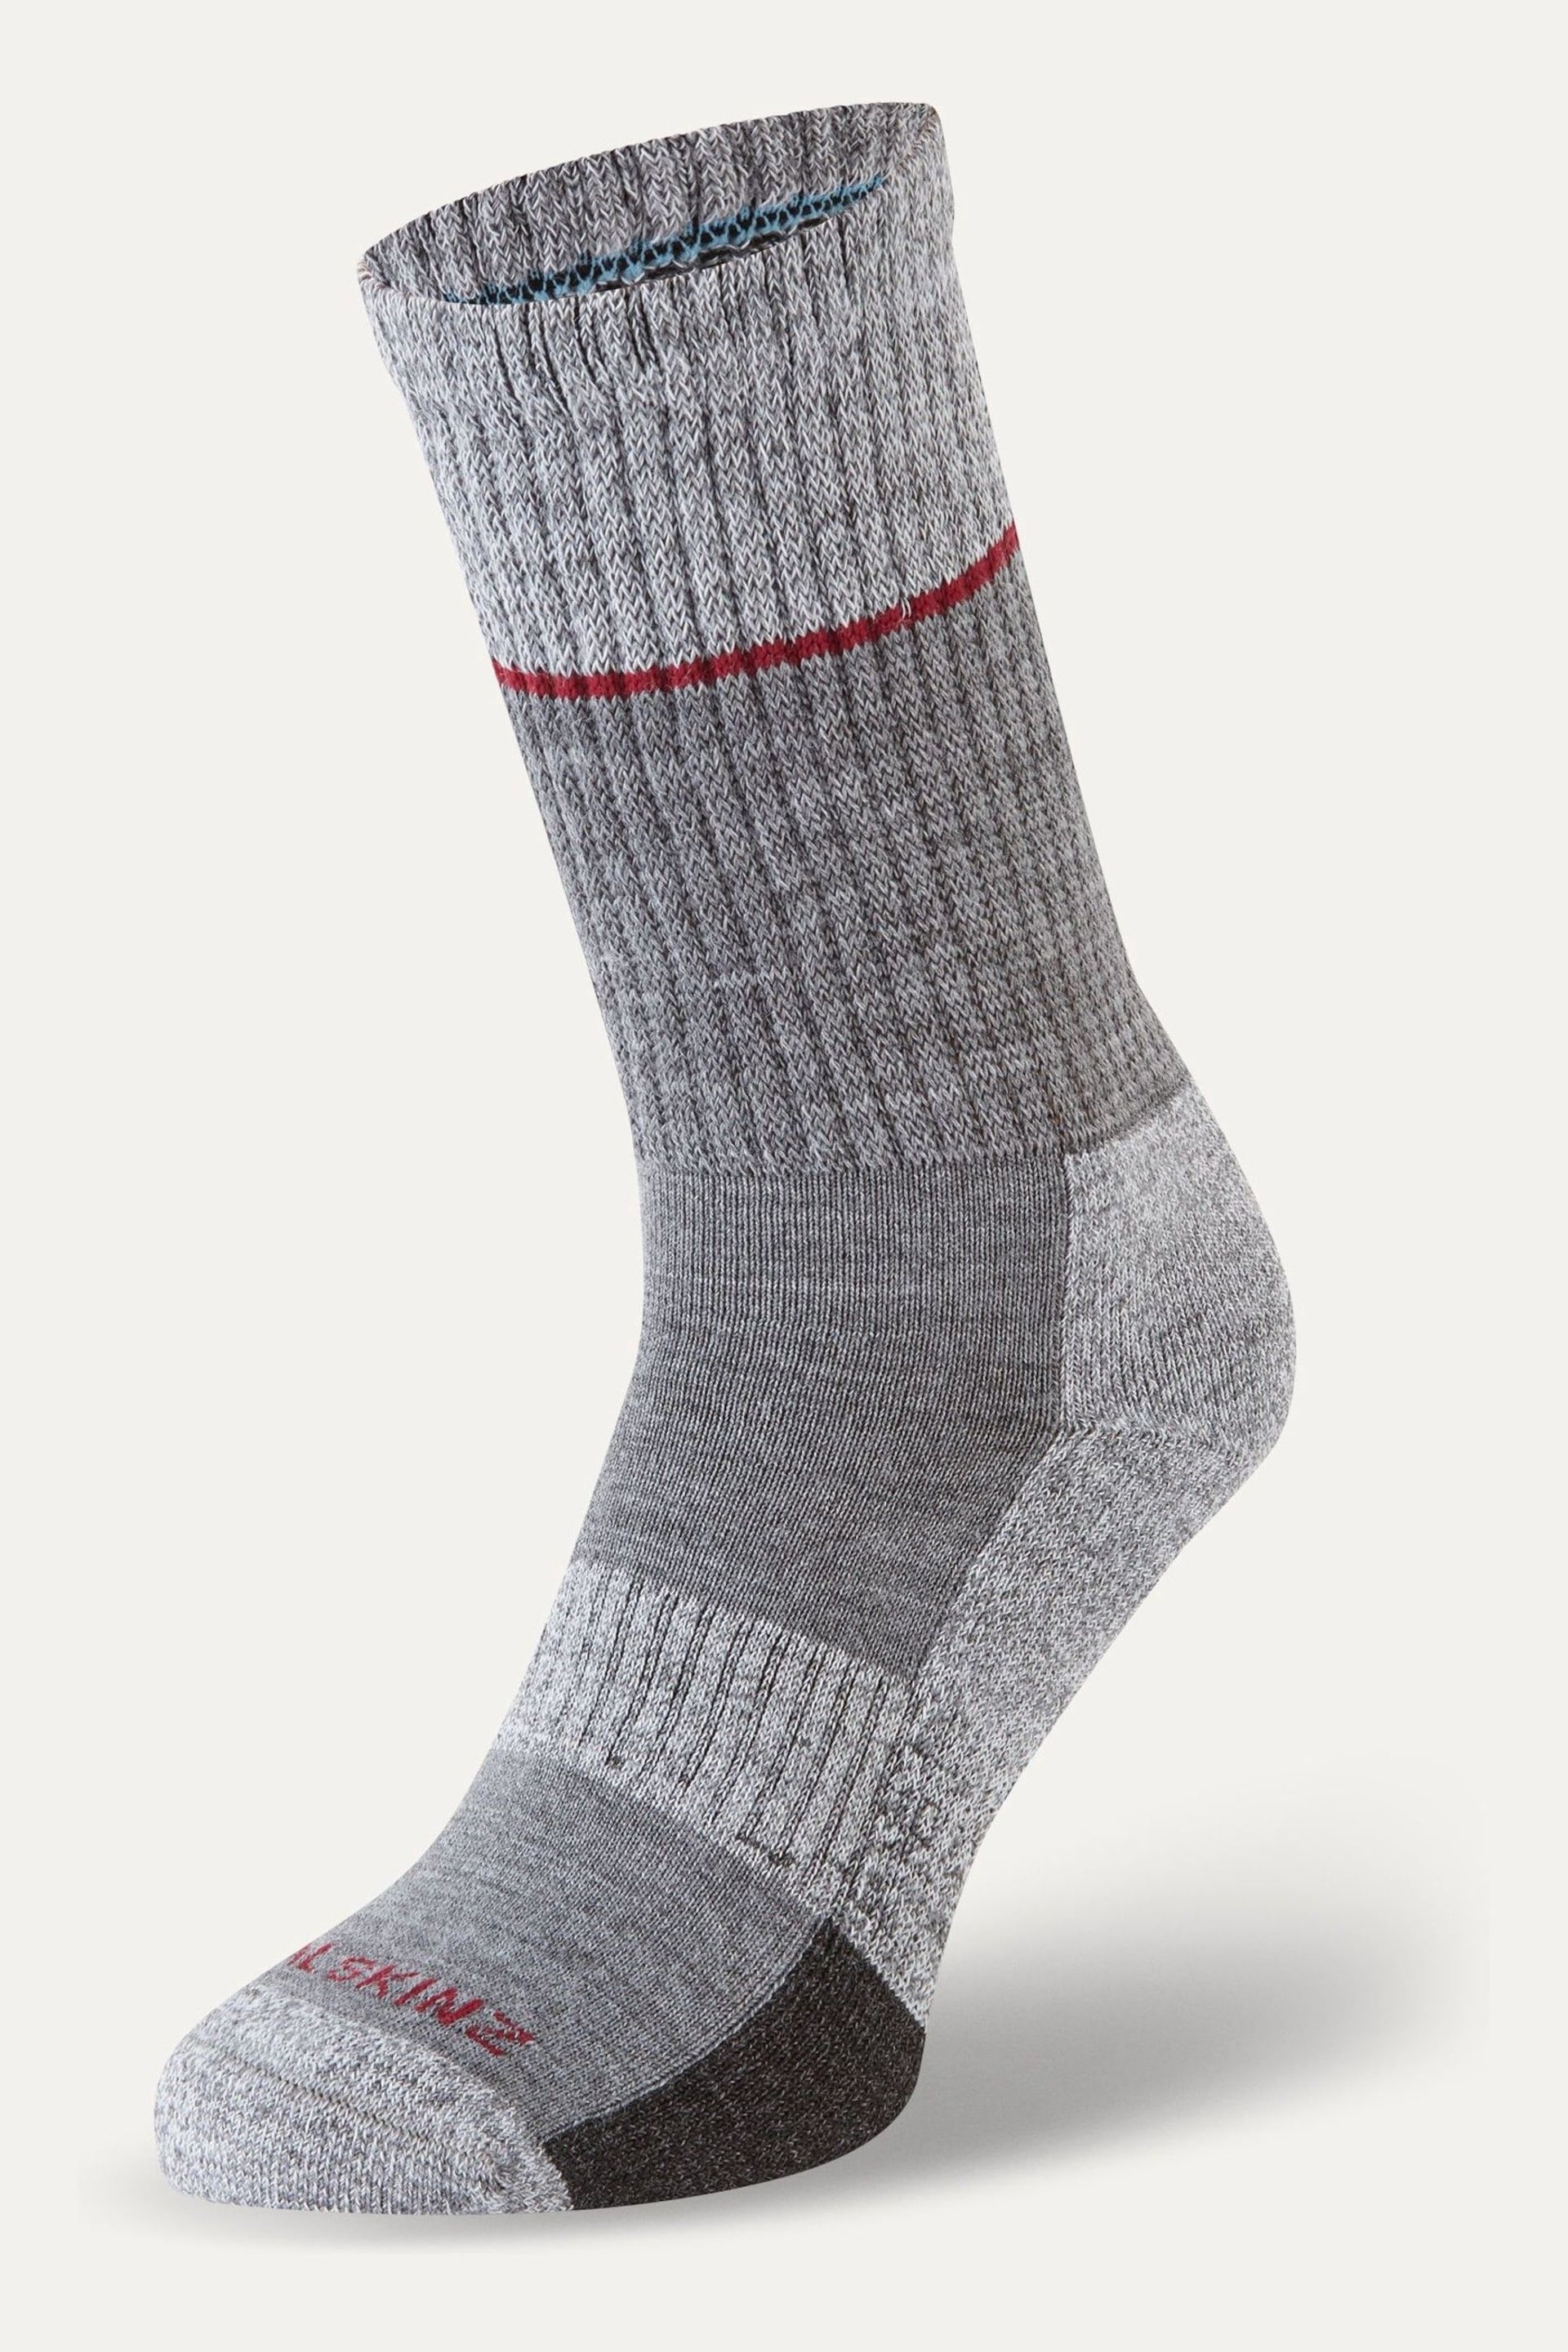 Sealskinz Thurton Non-Waterproof Quickdry Mid Length Socks - Image 1 of 2